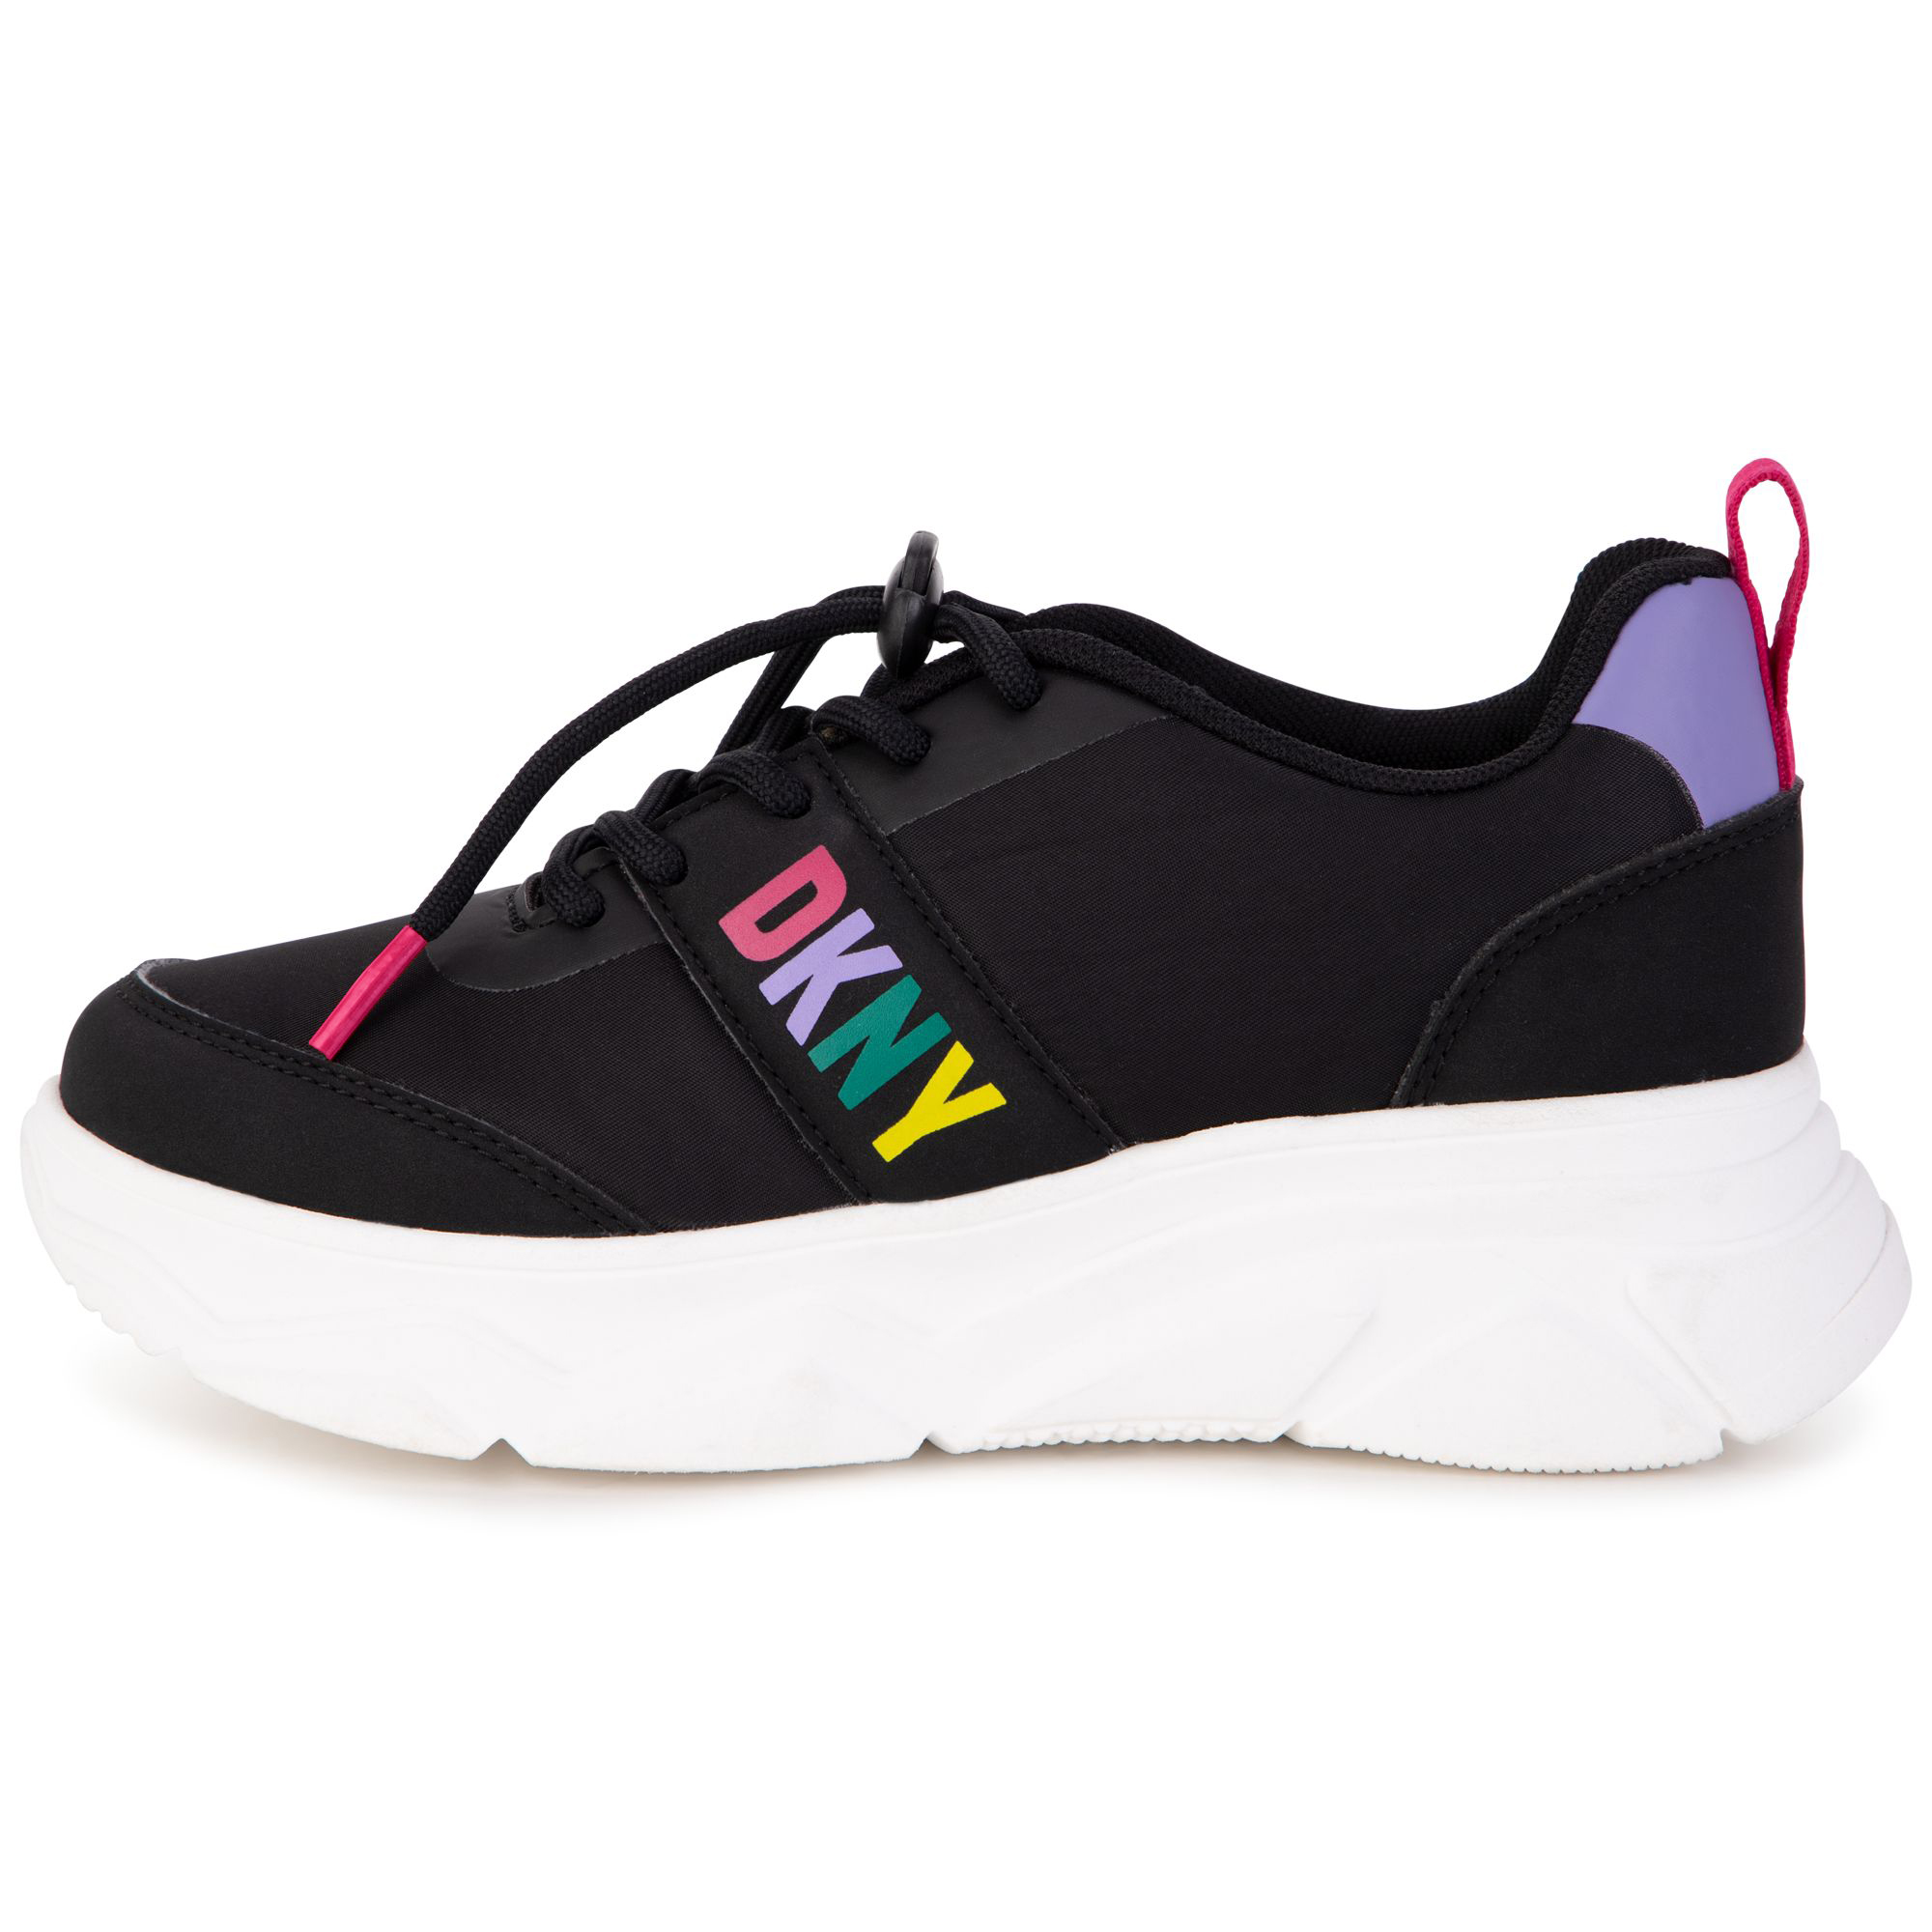 SNEAKERS DKNY for GIRL